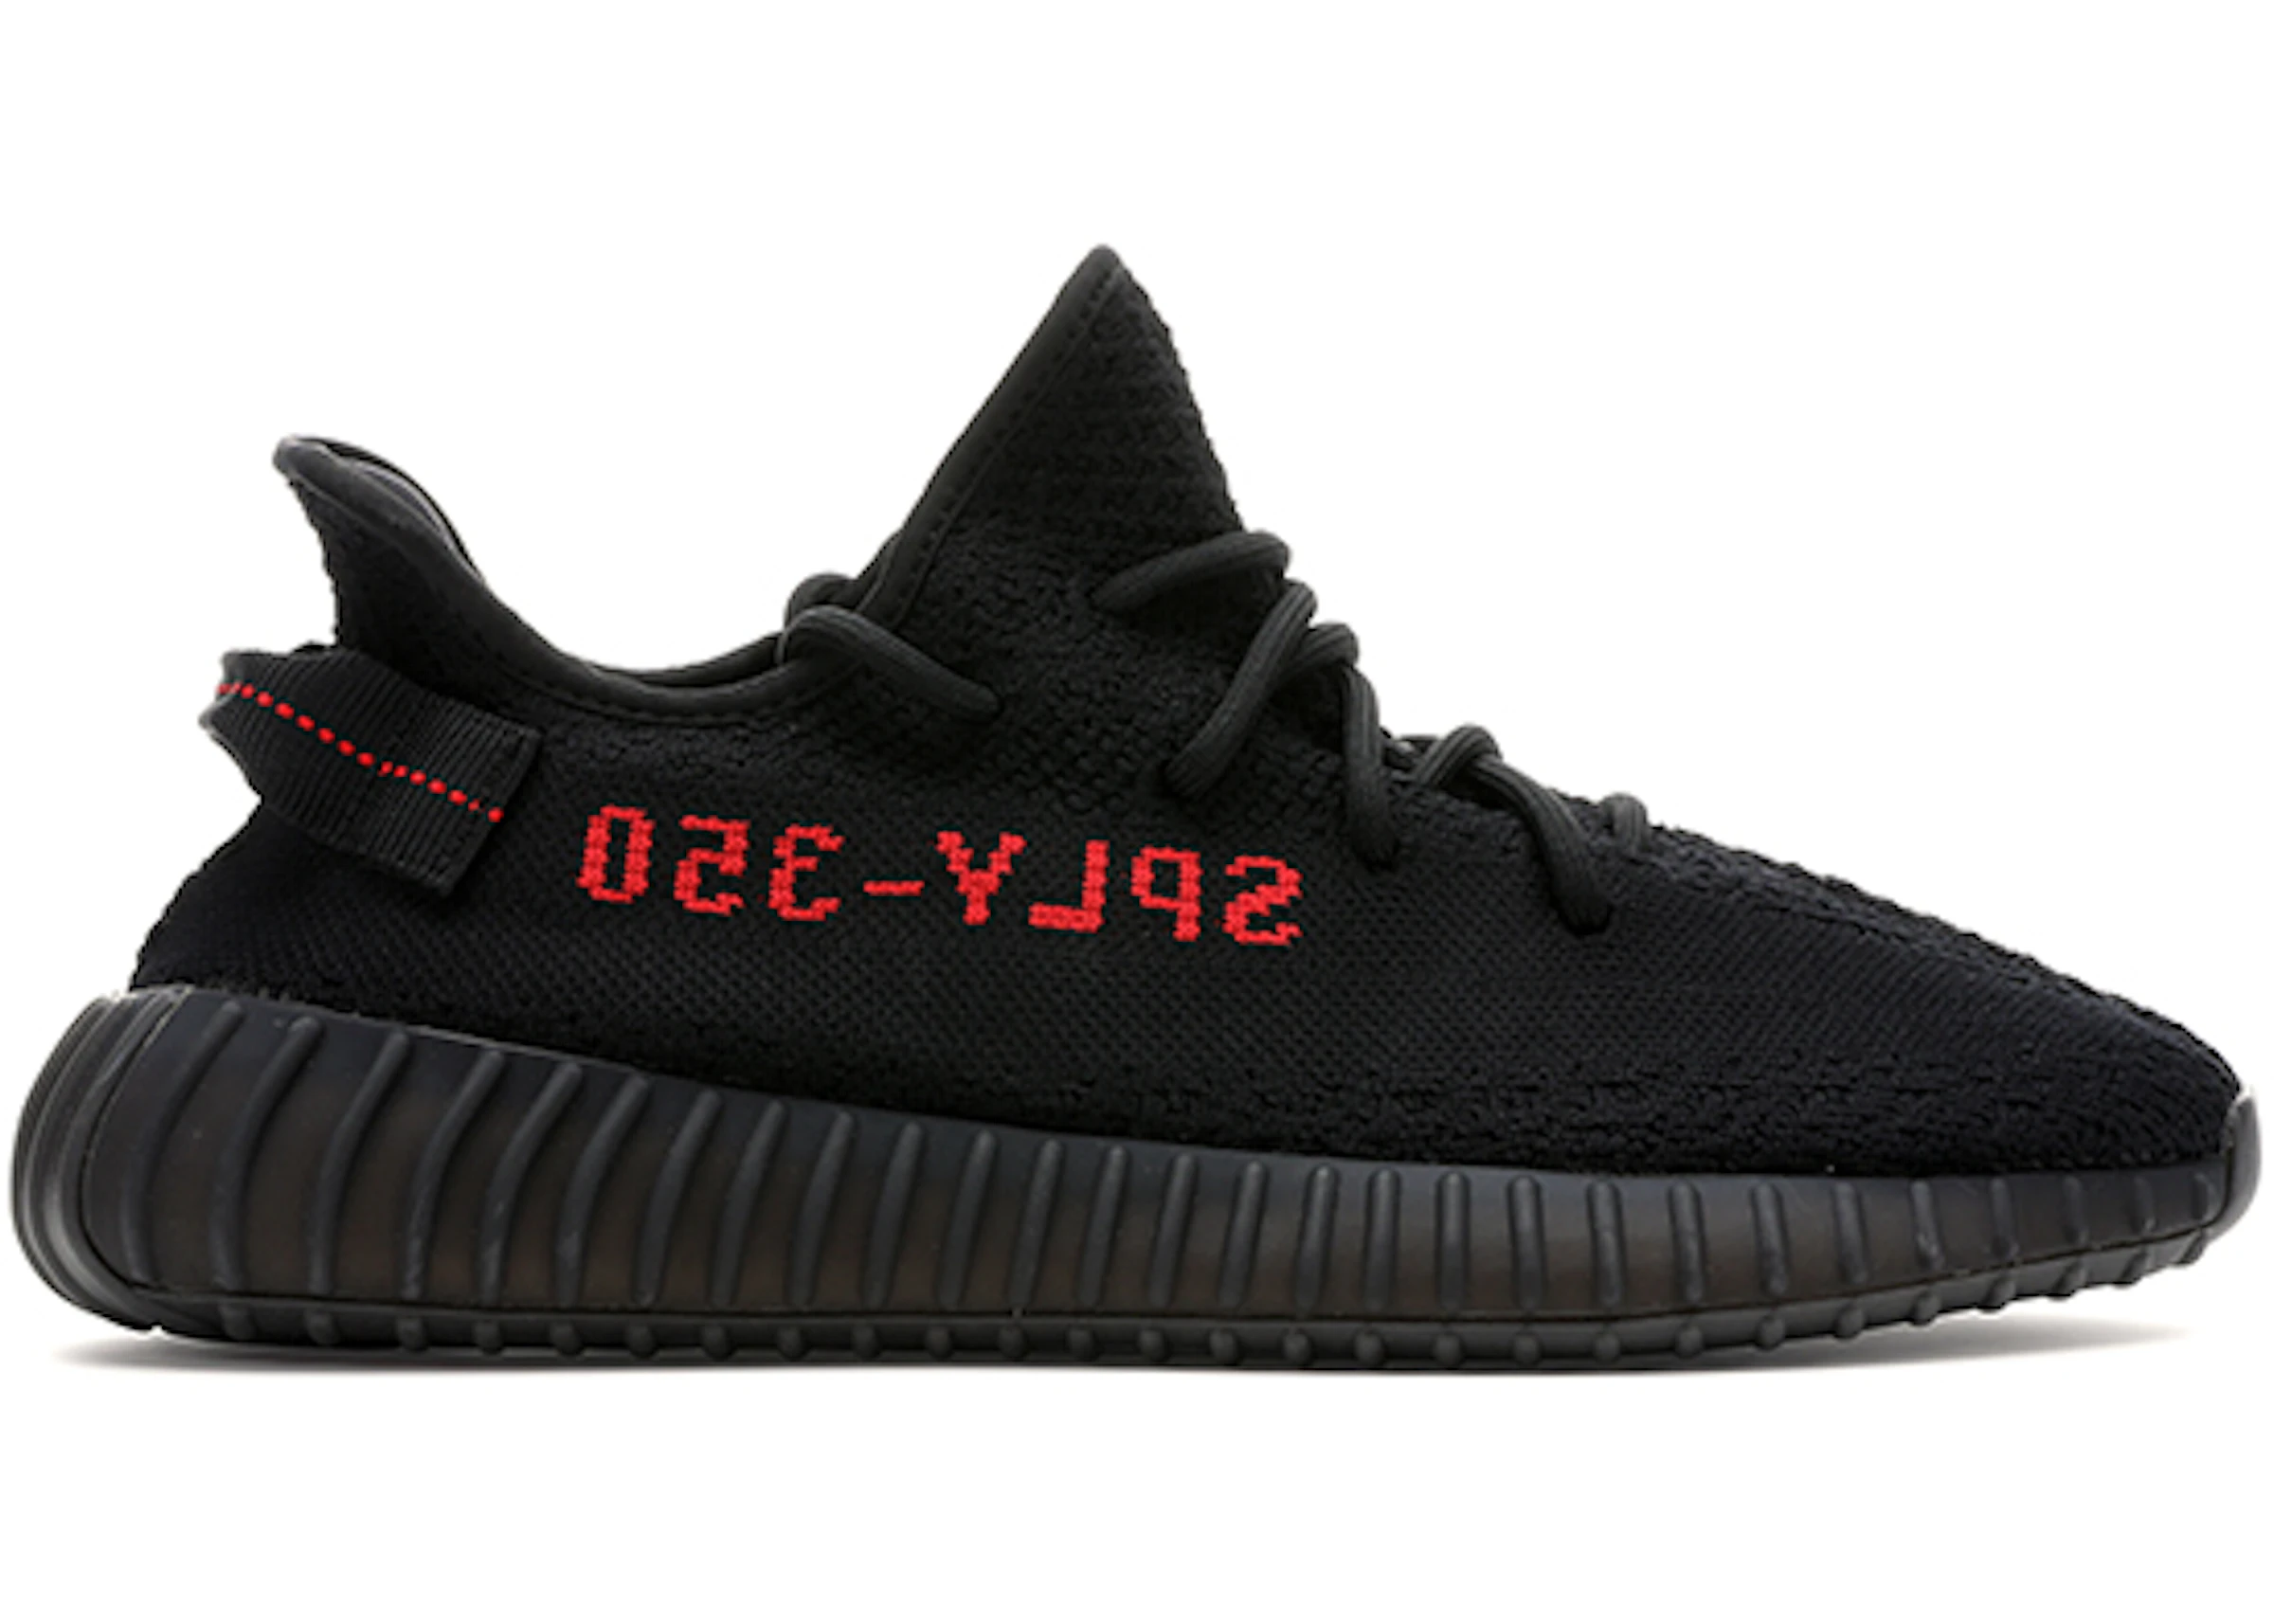 Do well () Make an effort mow adidas Yeezy Boost 350 V2 Black Red (2017/2020) - CP9652 - US